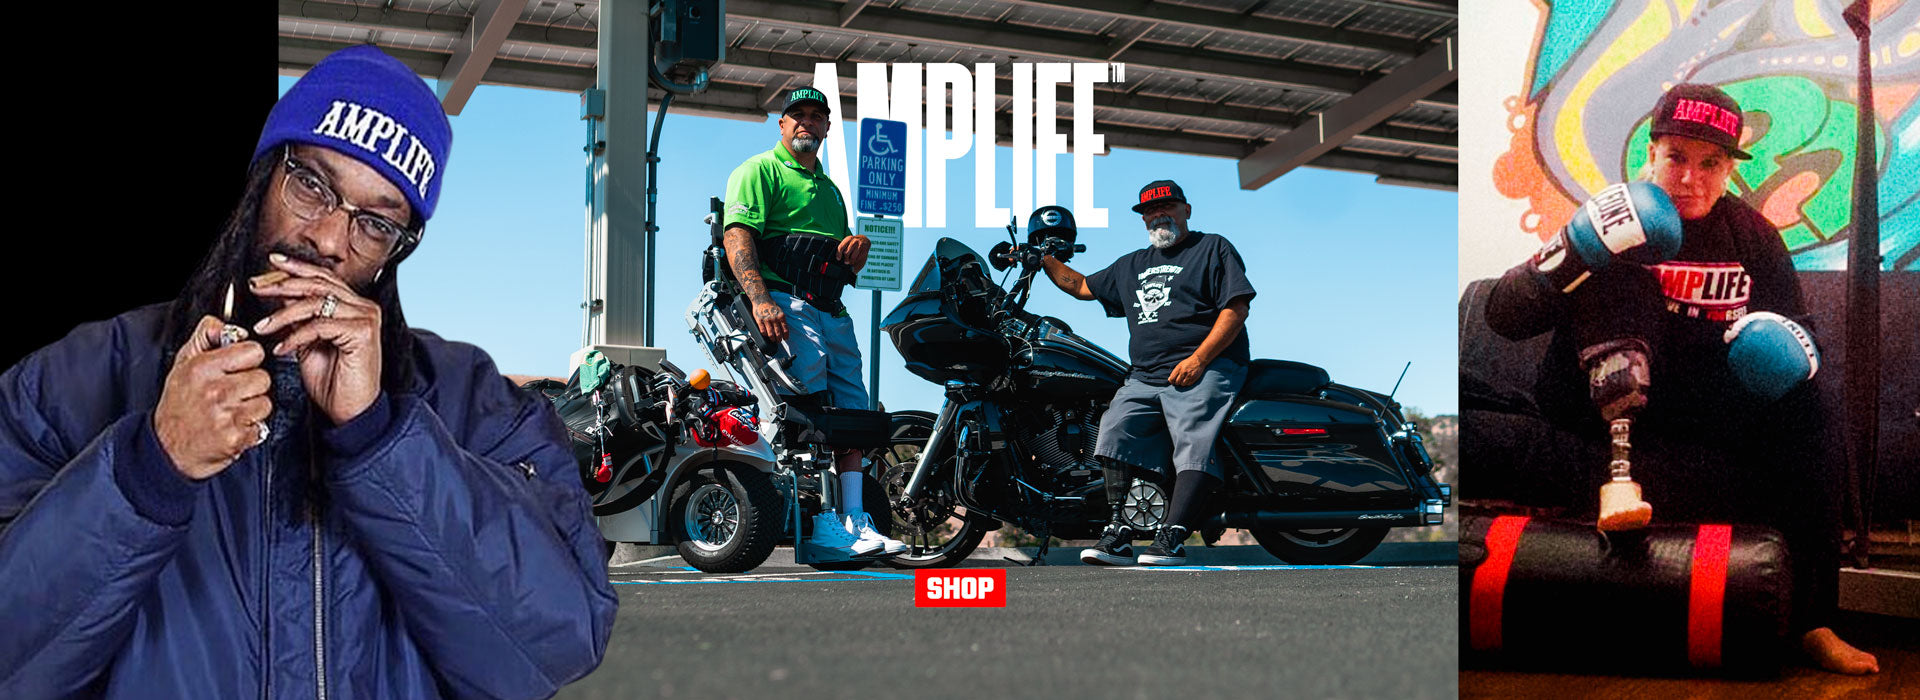 AMPLIFE™ COLLECTION